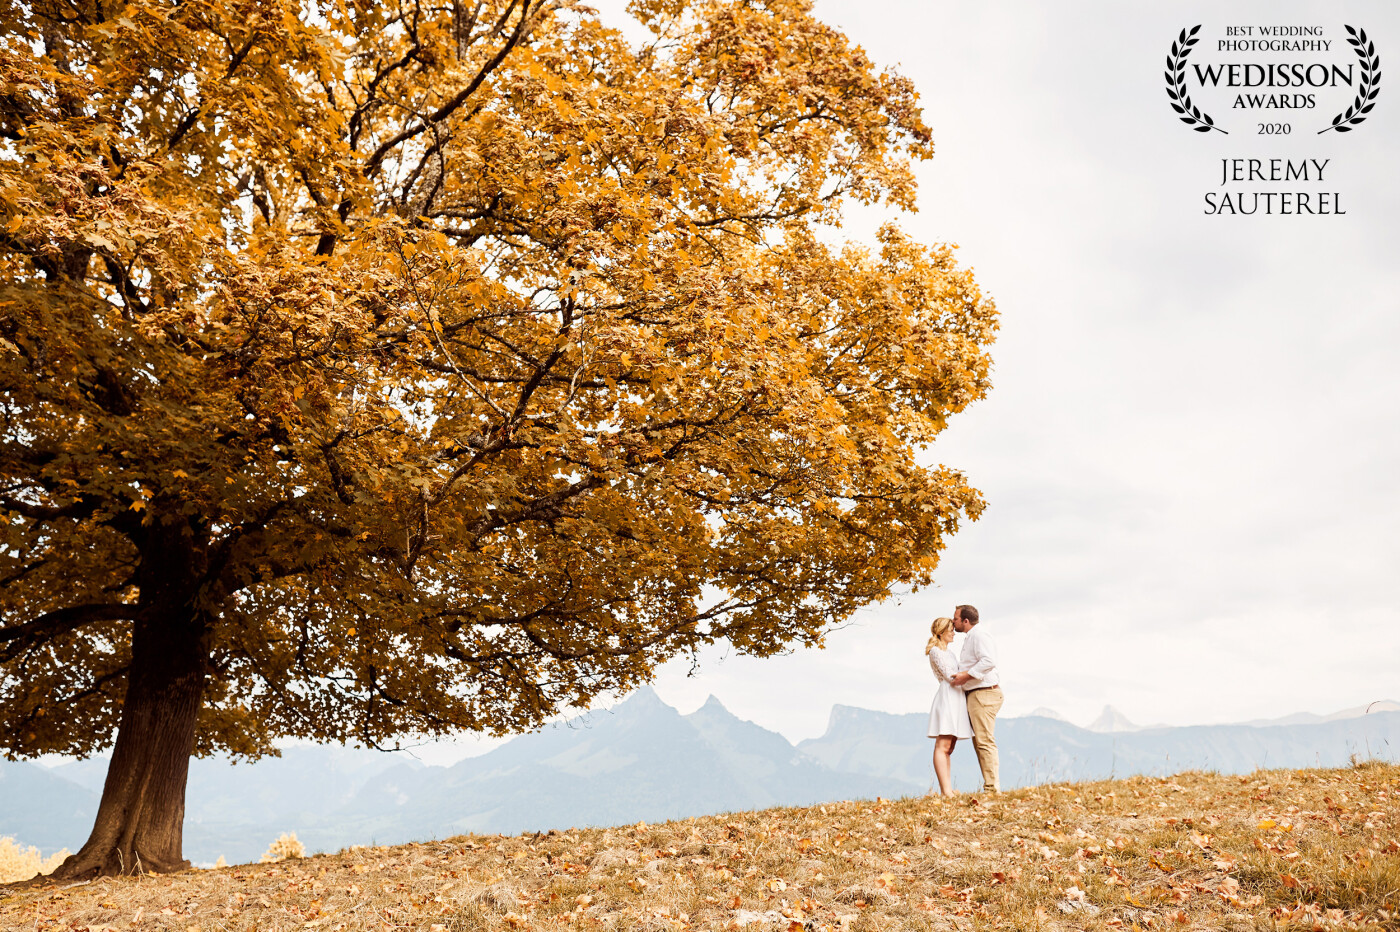 An engagement session in the fall with future brides and grooms. In the background the Friborg mountains in Switzerland. I simply asked the couple to do a few kisses while I backed up with my camera.